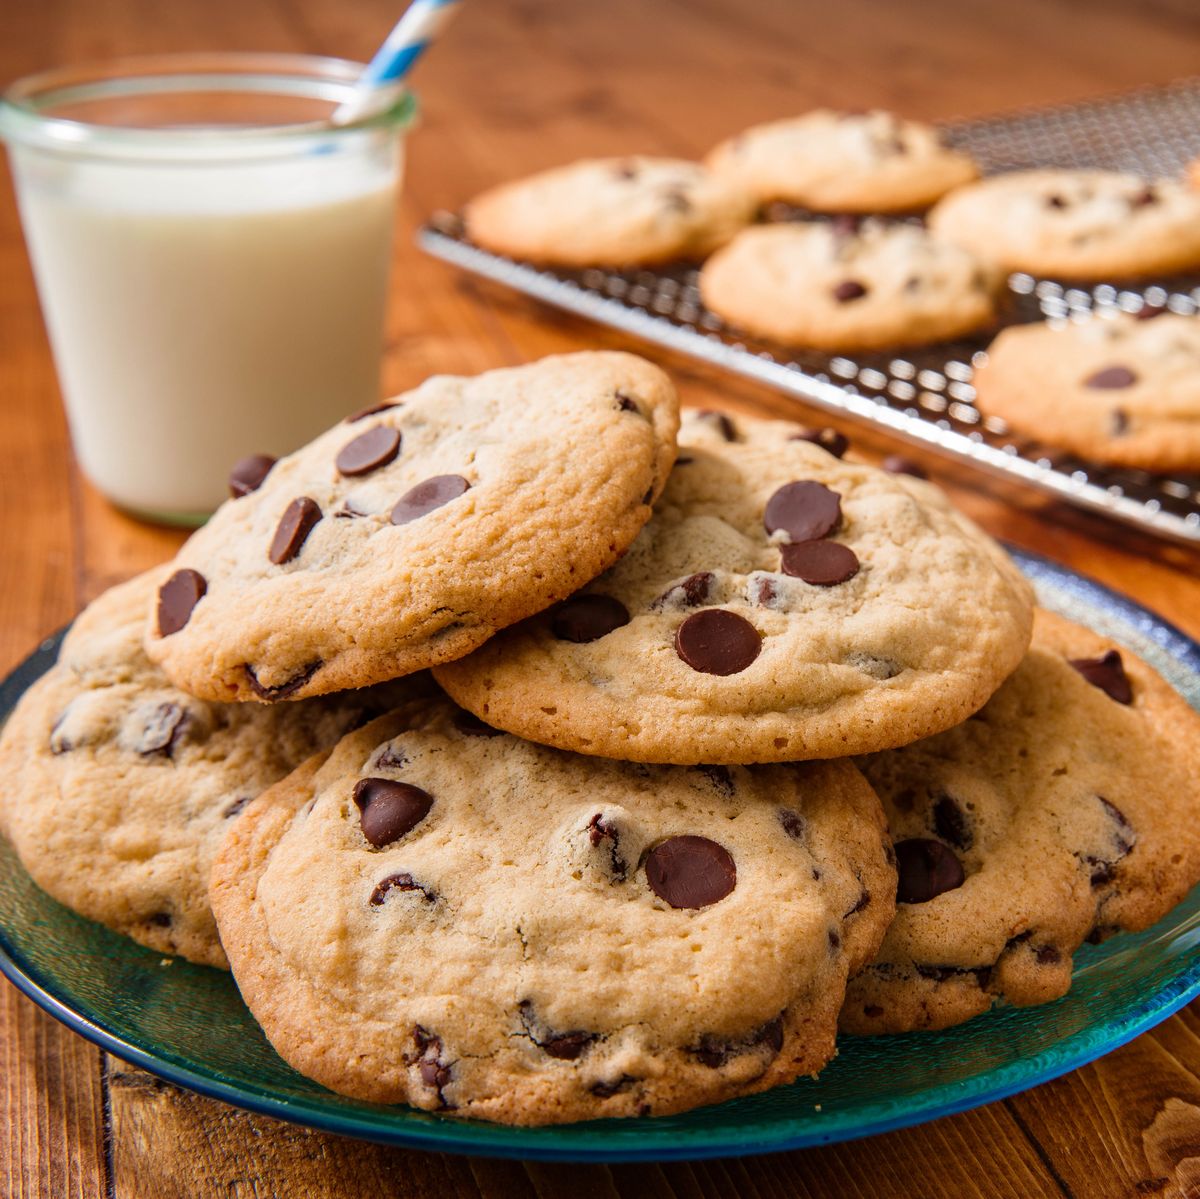 How To Store Homemade Chocolate Chip Cookies